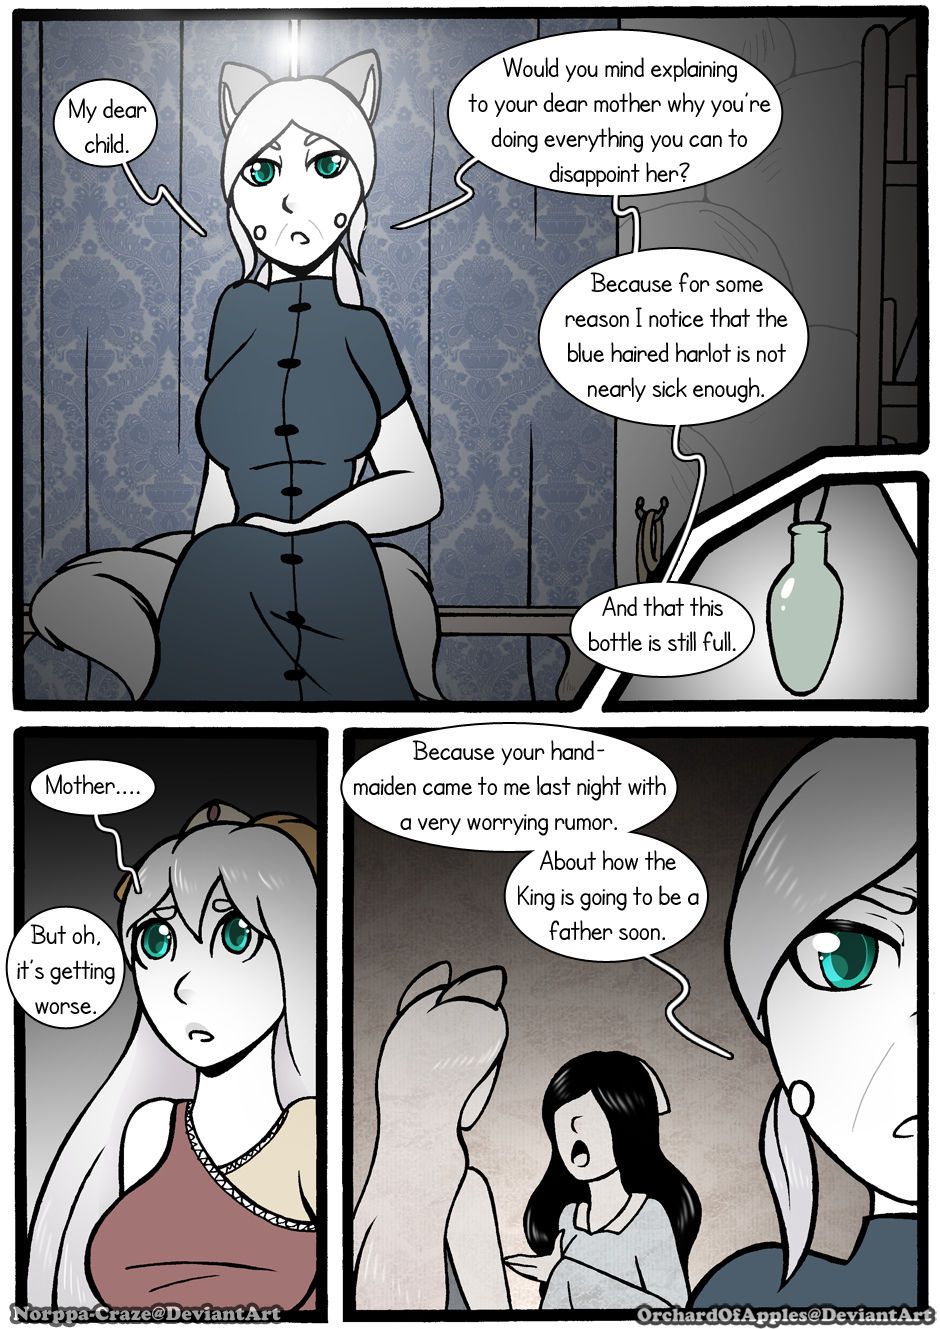 [Jeny-jen94] Between Kings and Queens [Ongoing] 272